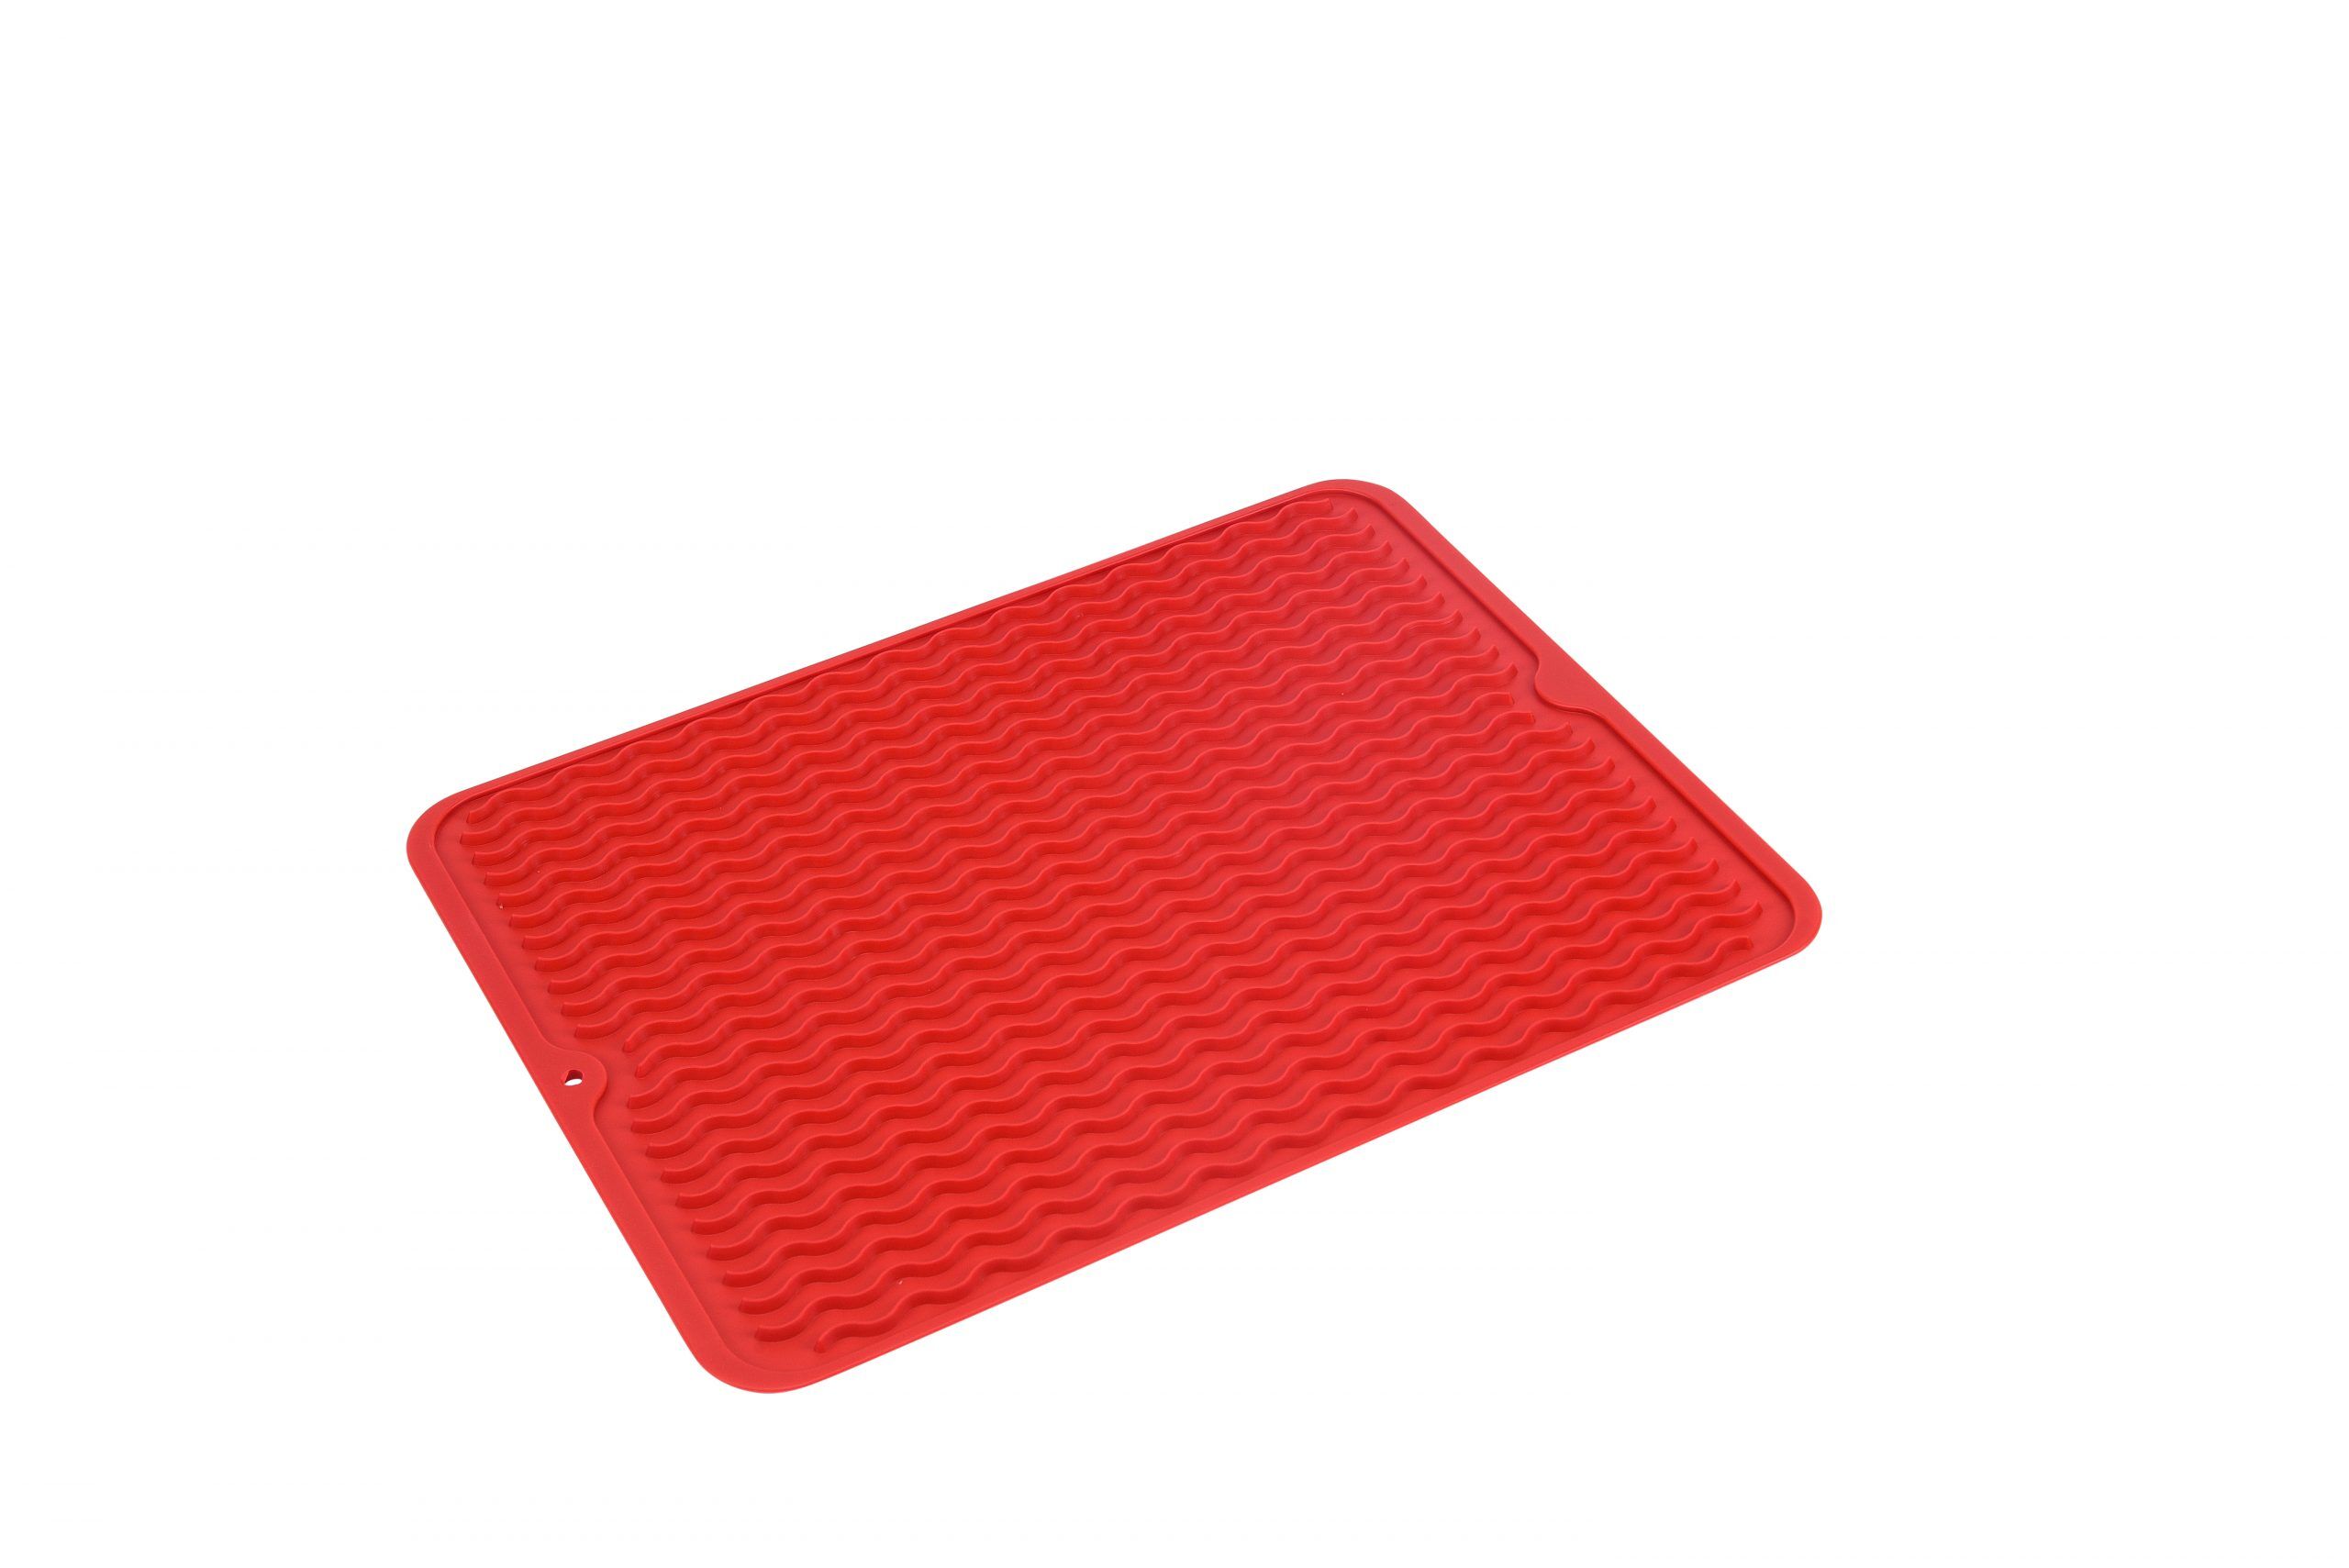 https://cdn-bipfg.nitrocdn.com/aWIusSJHcxaWDfmYObhOXMkIJLZeapra/assets/images/optimized/rev-ff631e6/wp-content/uploads/2021/04/Custom-Silicone-Dish-Drying-Mat-for-Sink-and-Counter-Red-Color-scaled.jpg